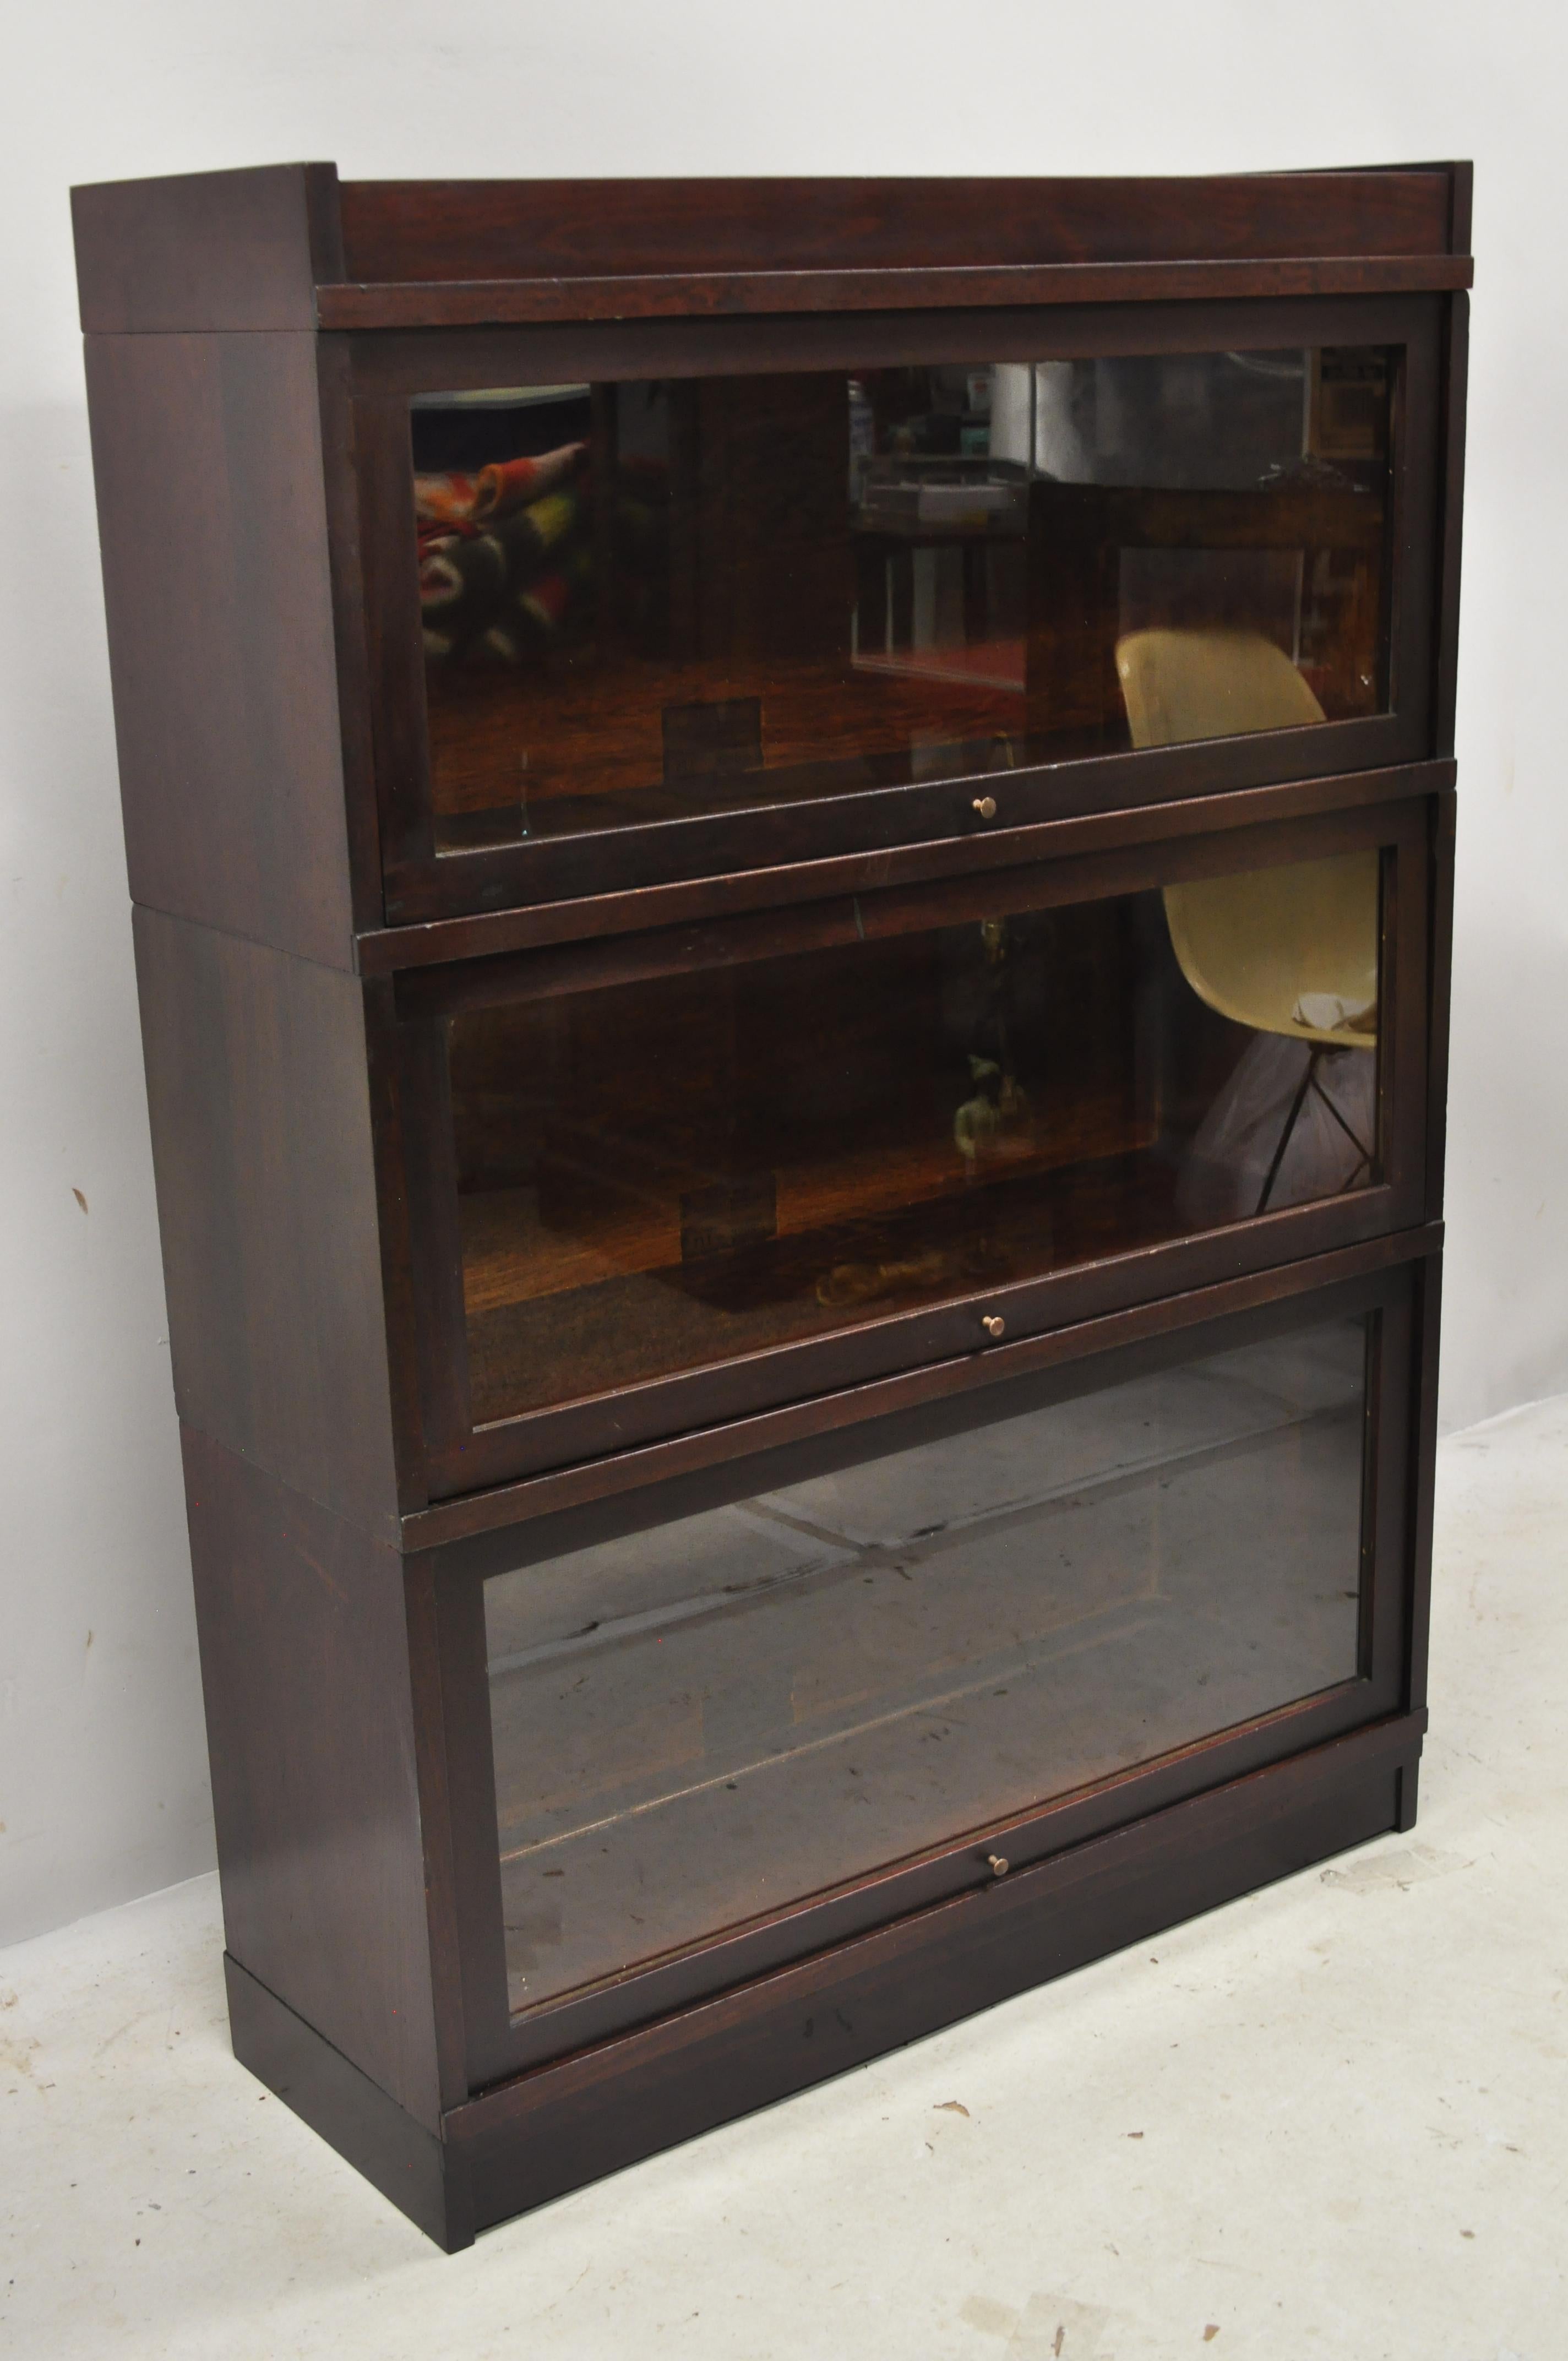 Antique Globe Wernicke mahogany stacking 3 section Barrister Lawyers bookcase. Item features 3 stacking sections, glass sliding doors, beautiful wood grain, original labels, very nice antique item, great style and form, circa early to mid-20th